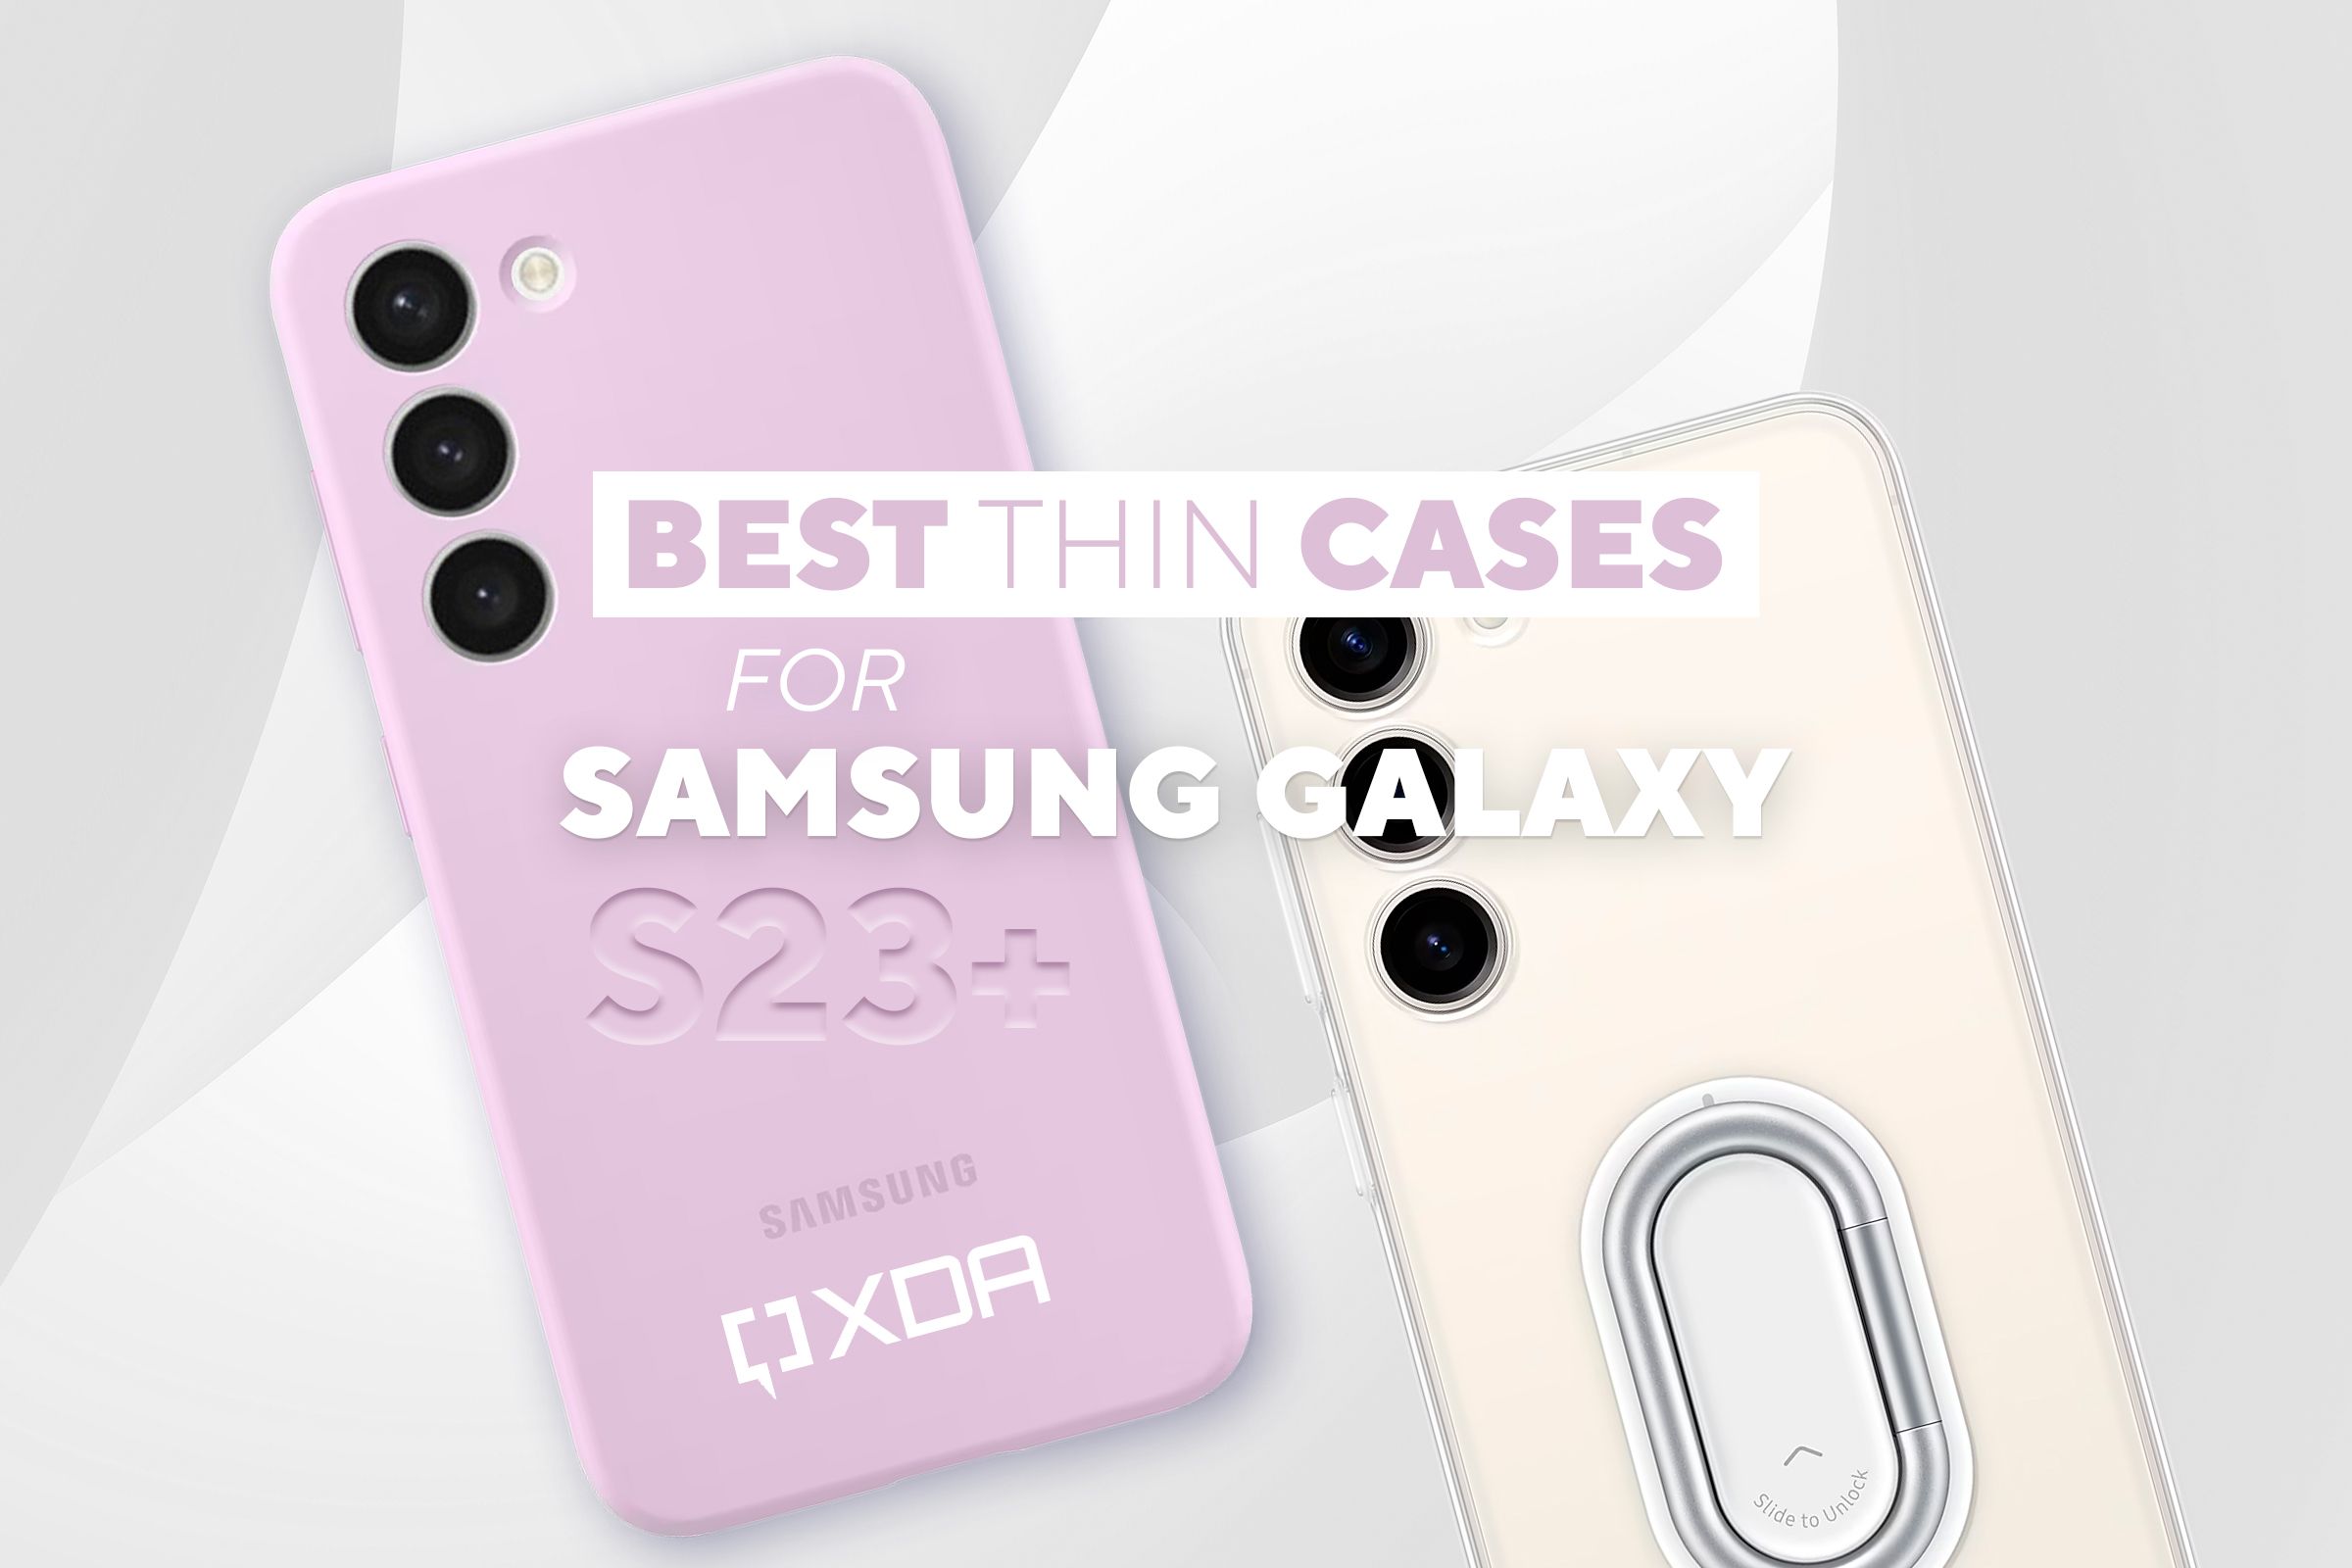 Best thin cases for Samsung Galaxy S23+ in 2023